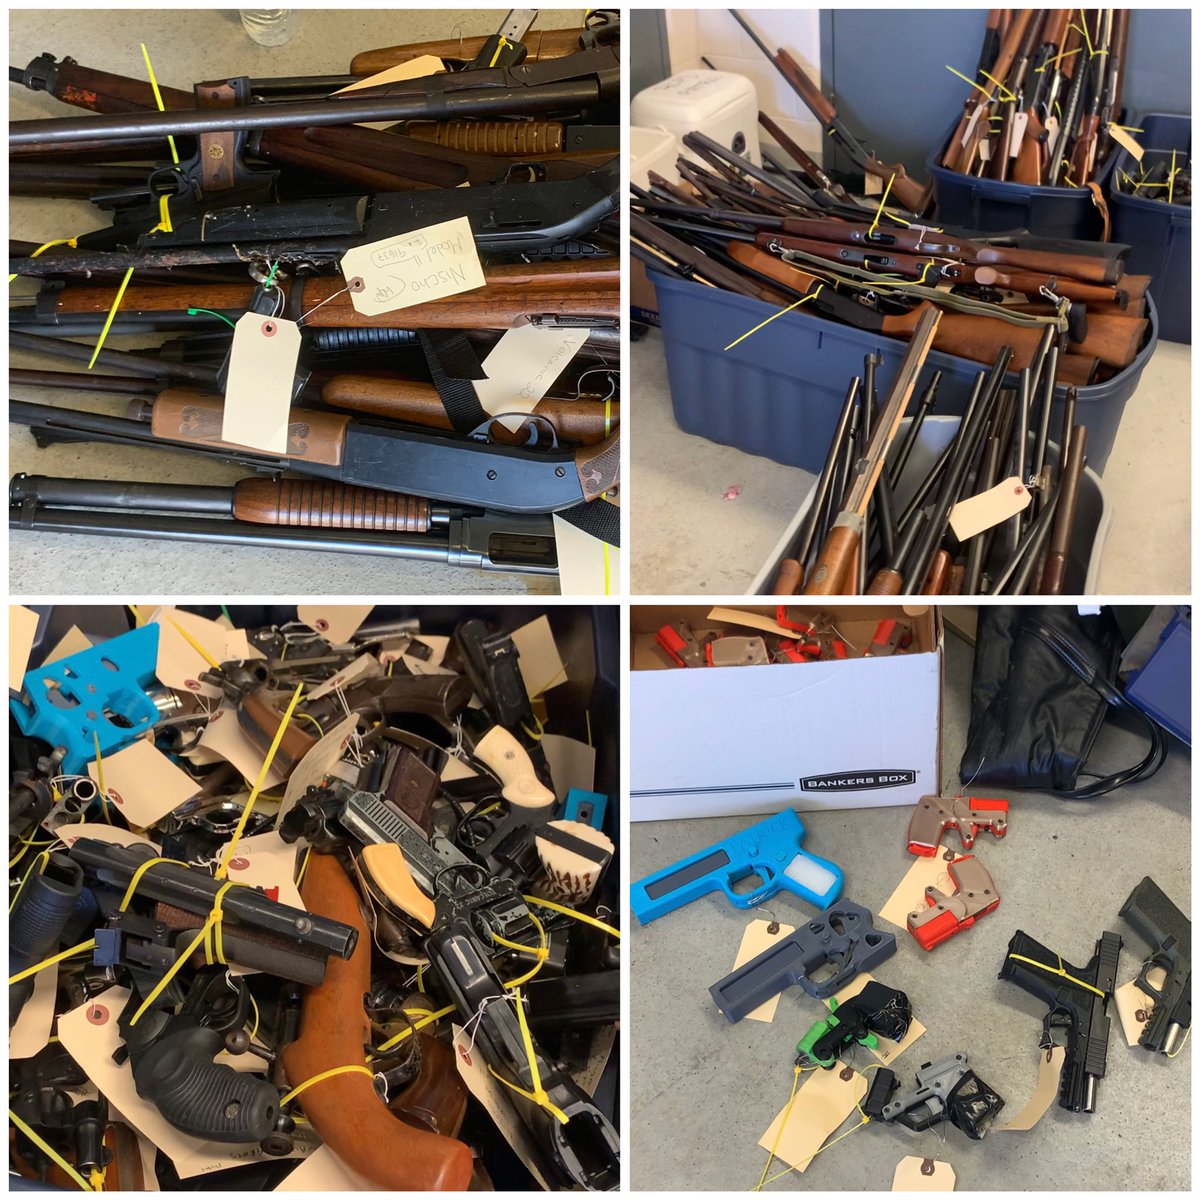 In what we can only describe as an overwhelming success, over 300 guns have been collected during today’s Gun Buyback. We thank everyone for their patience as we navigated through the long lines & traffic jams. @MCSAONEWS @MCPS